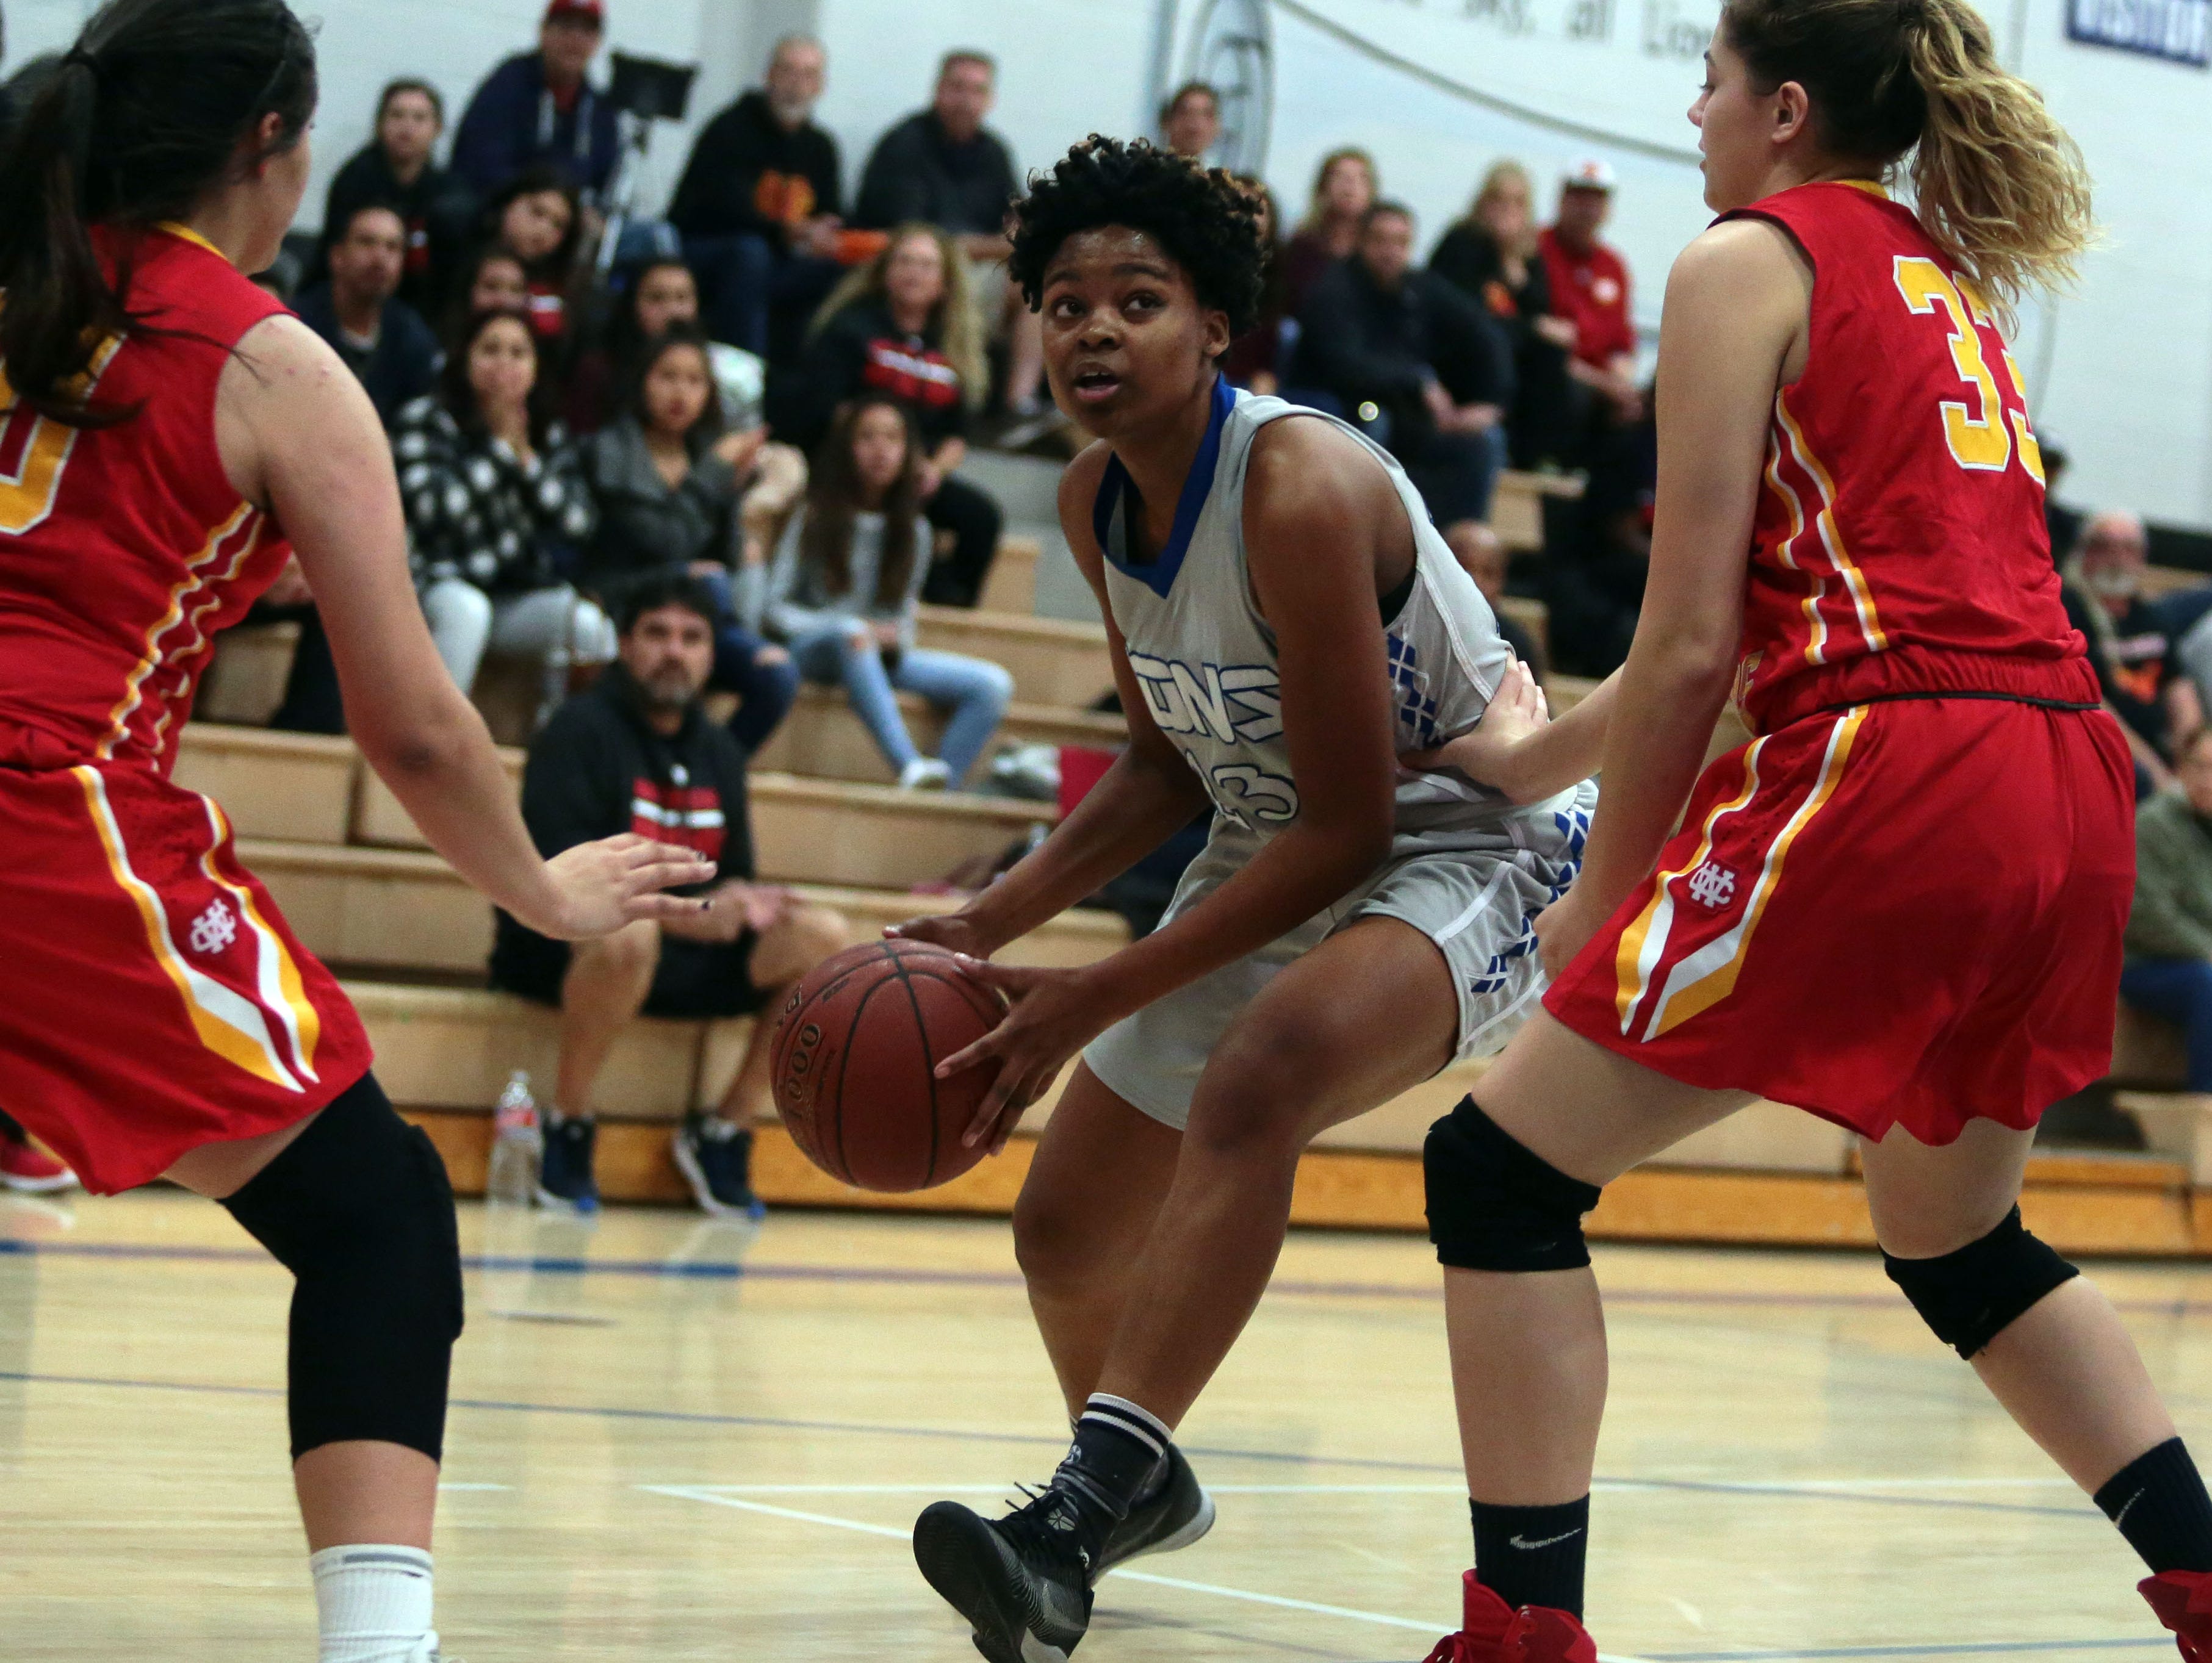 Cathedral City's Tatiana Witherspoon in action against Whittier Christian on Saturday, February 18, 2017 in Cathedral City.